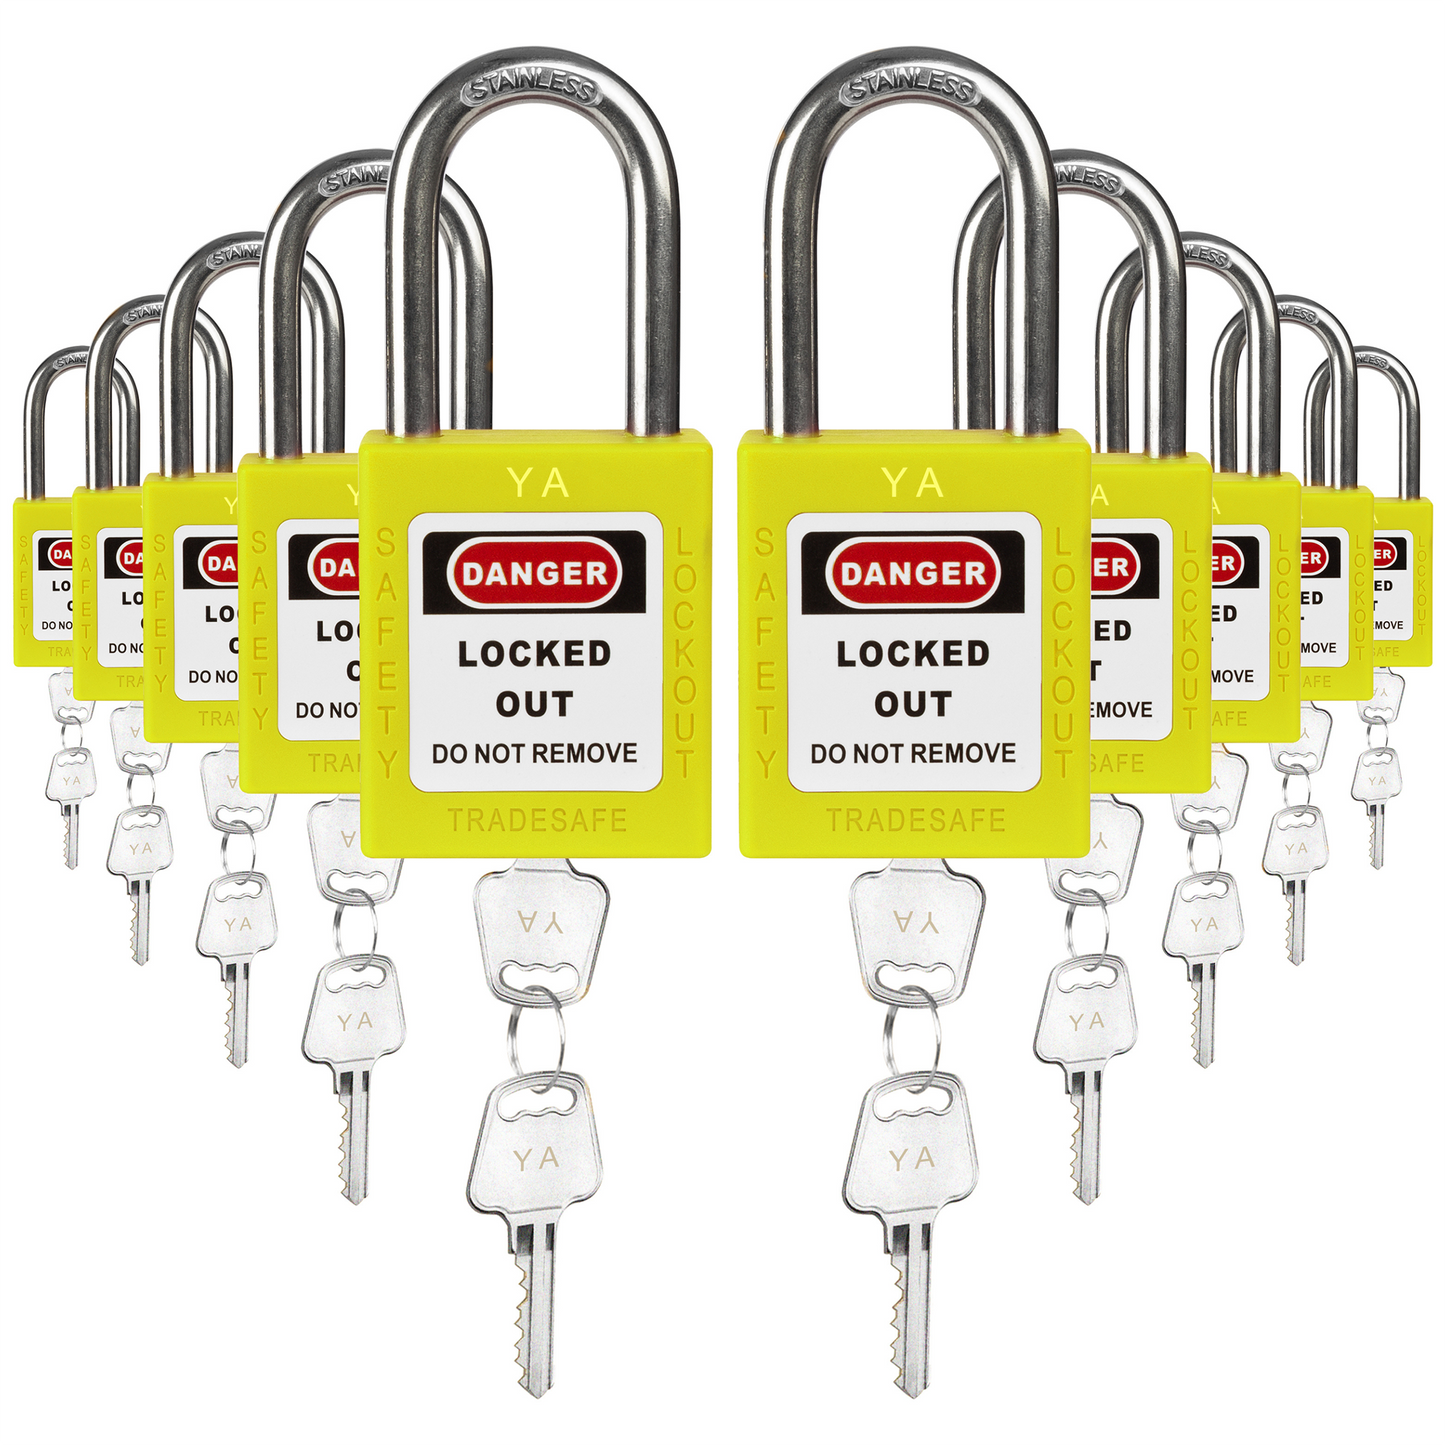 ten yellow loto padlocks, each with two keys and a YA letter code on both the lock body and the keys